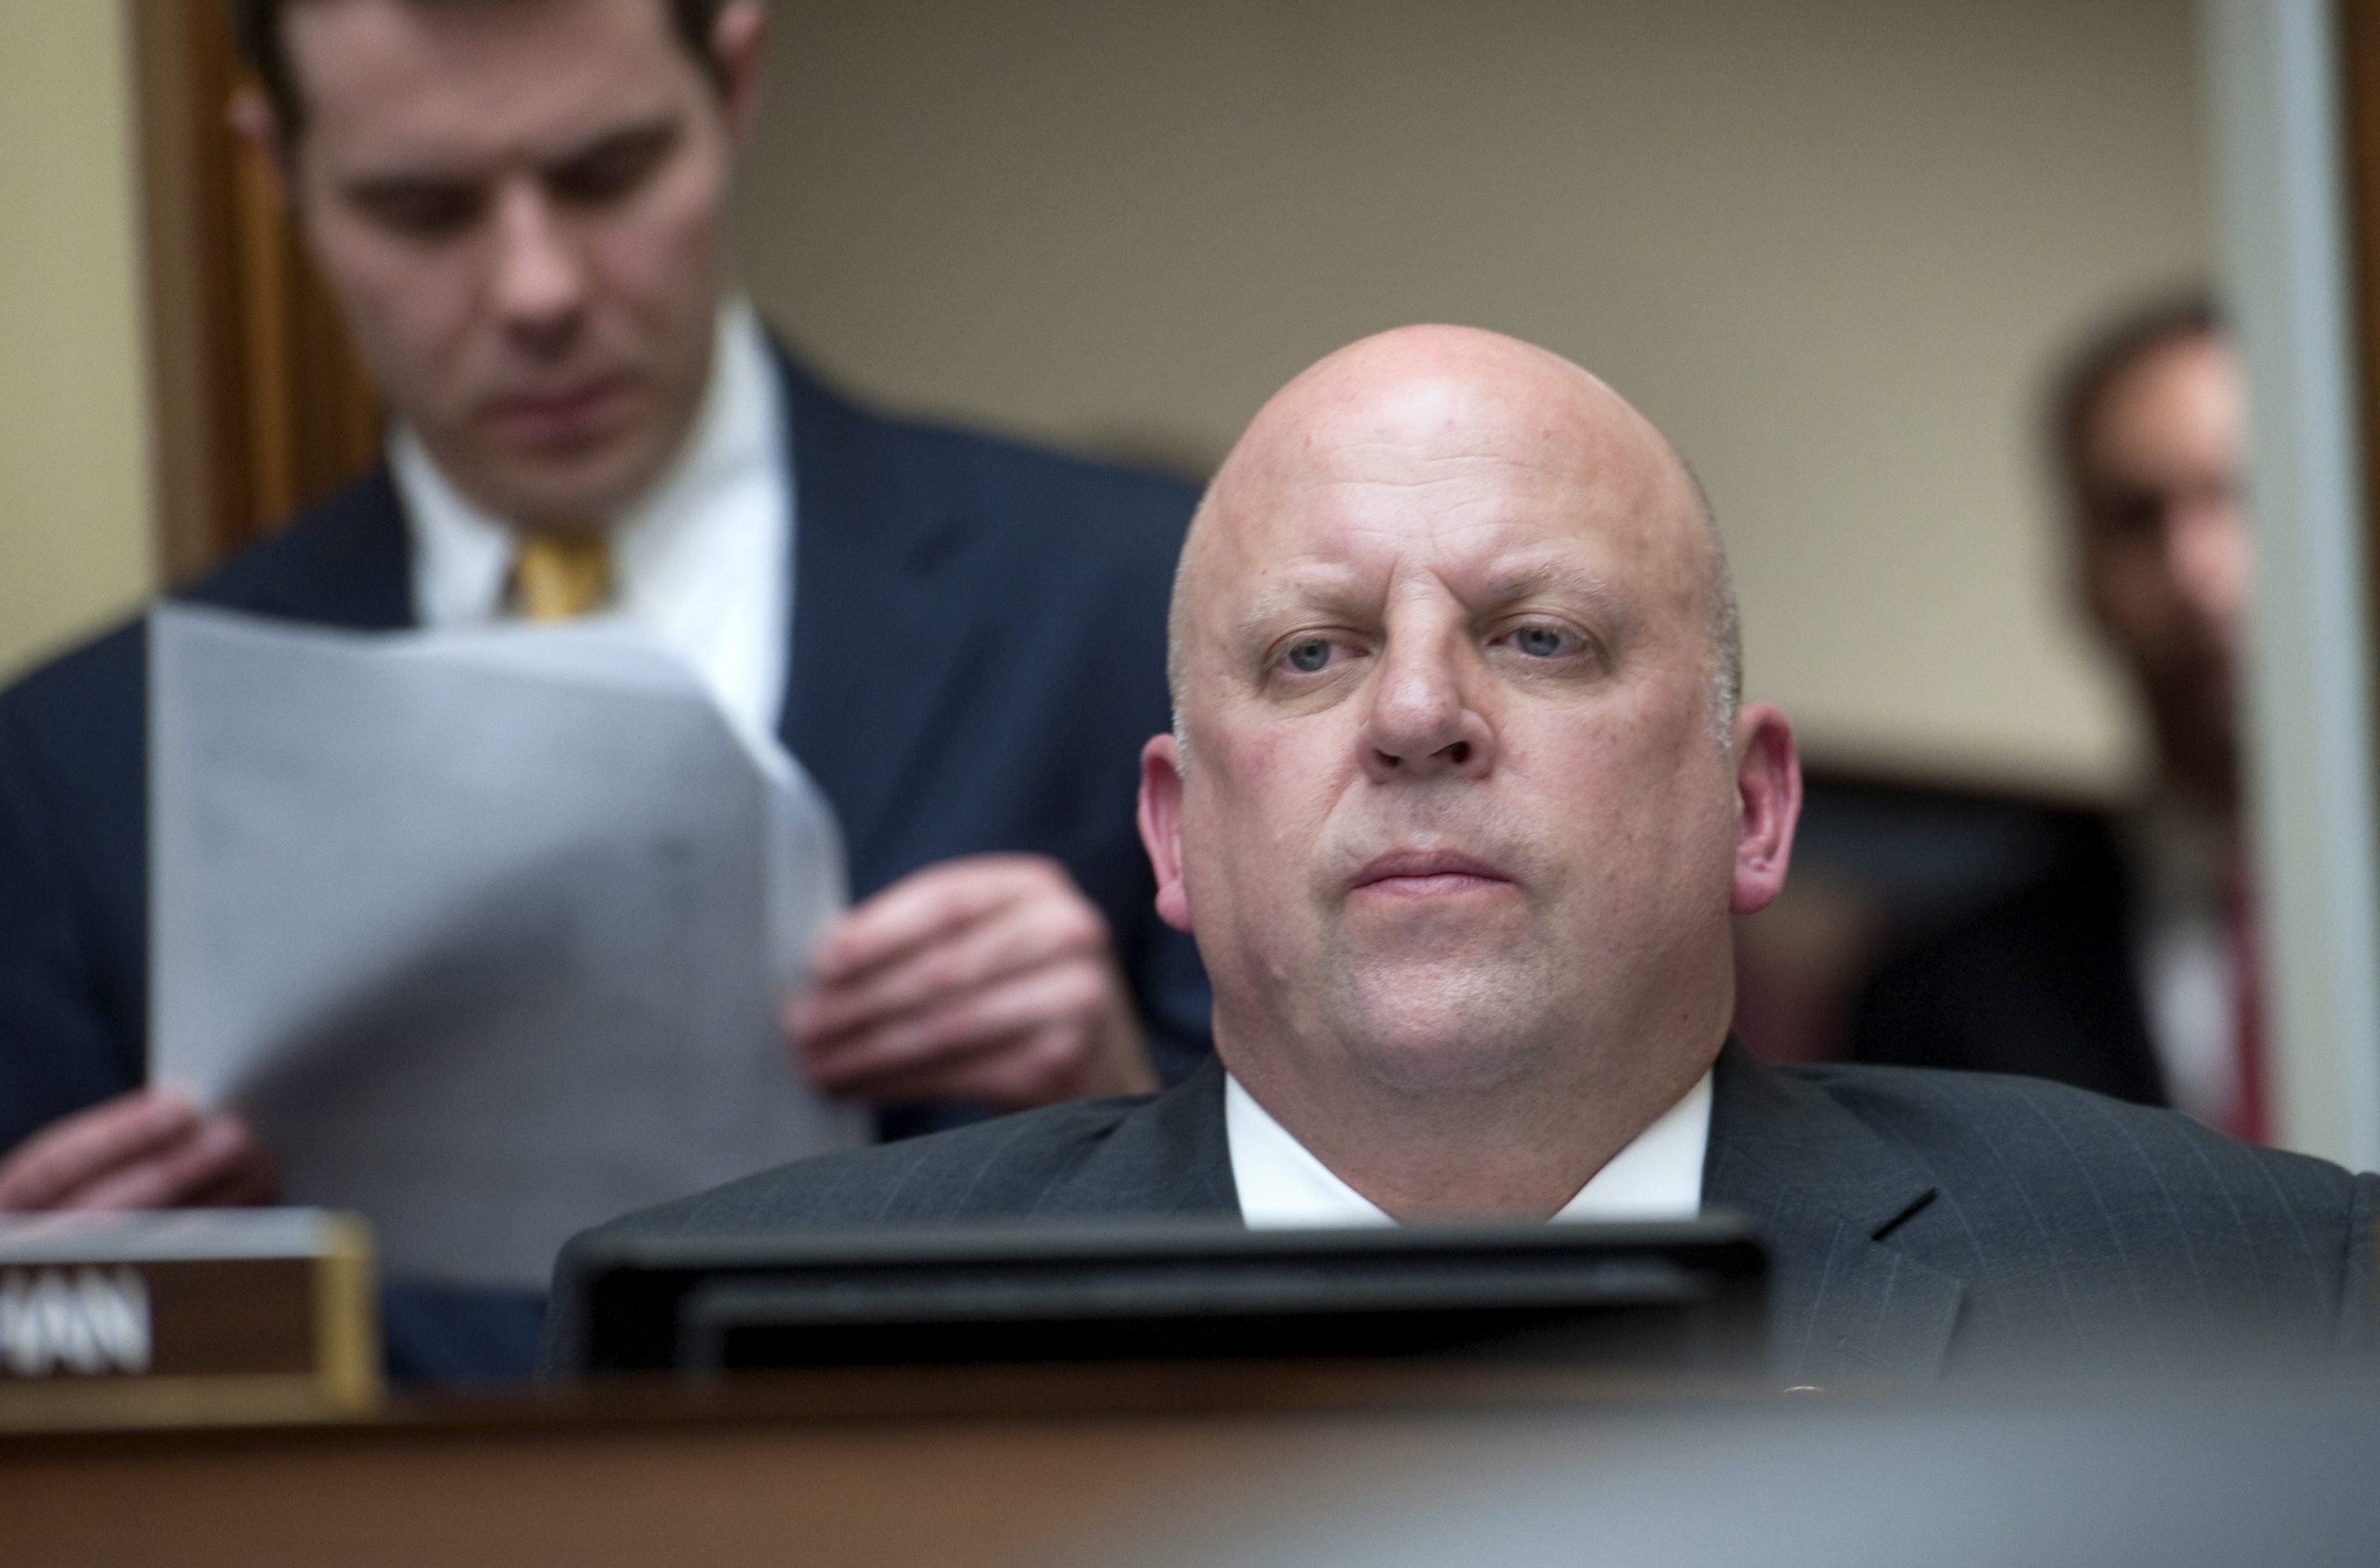 Rep. Scott DesJarlais, R-Tenn., at a House Oversight and Government Reform Committee hearing on "The Security Failures of Benghazi." (Chris Maddaloni—CQ-Roll Call,Inc.)